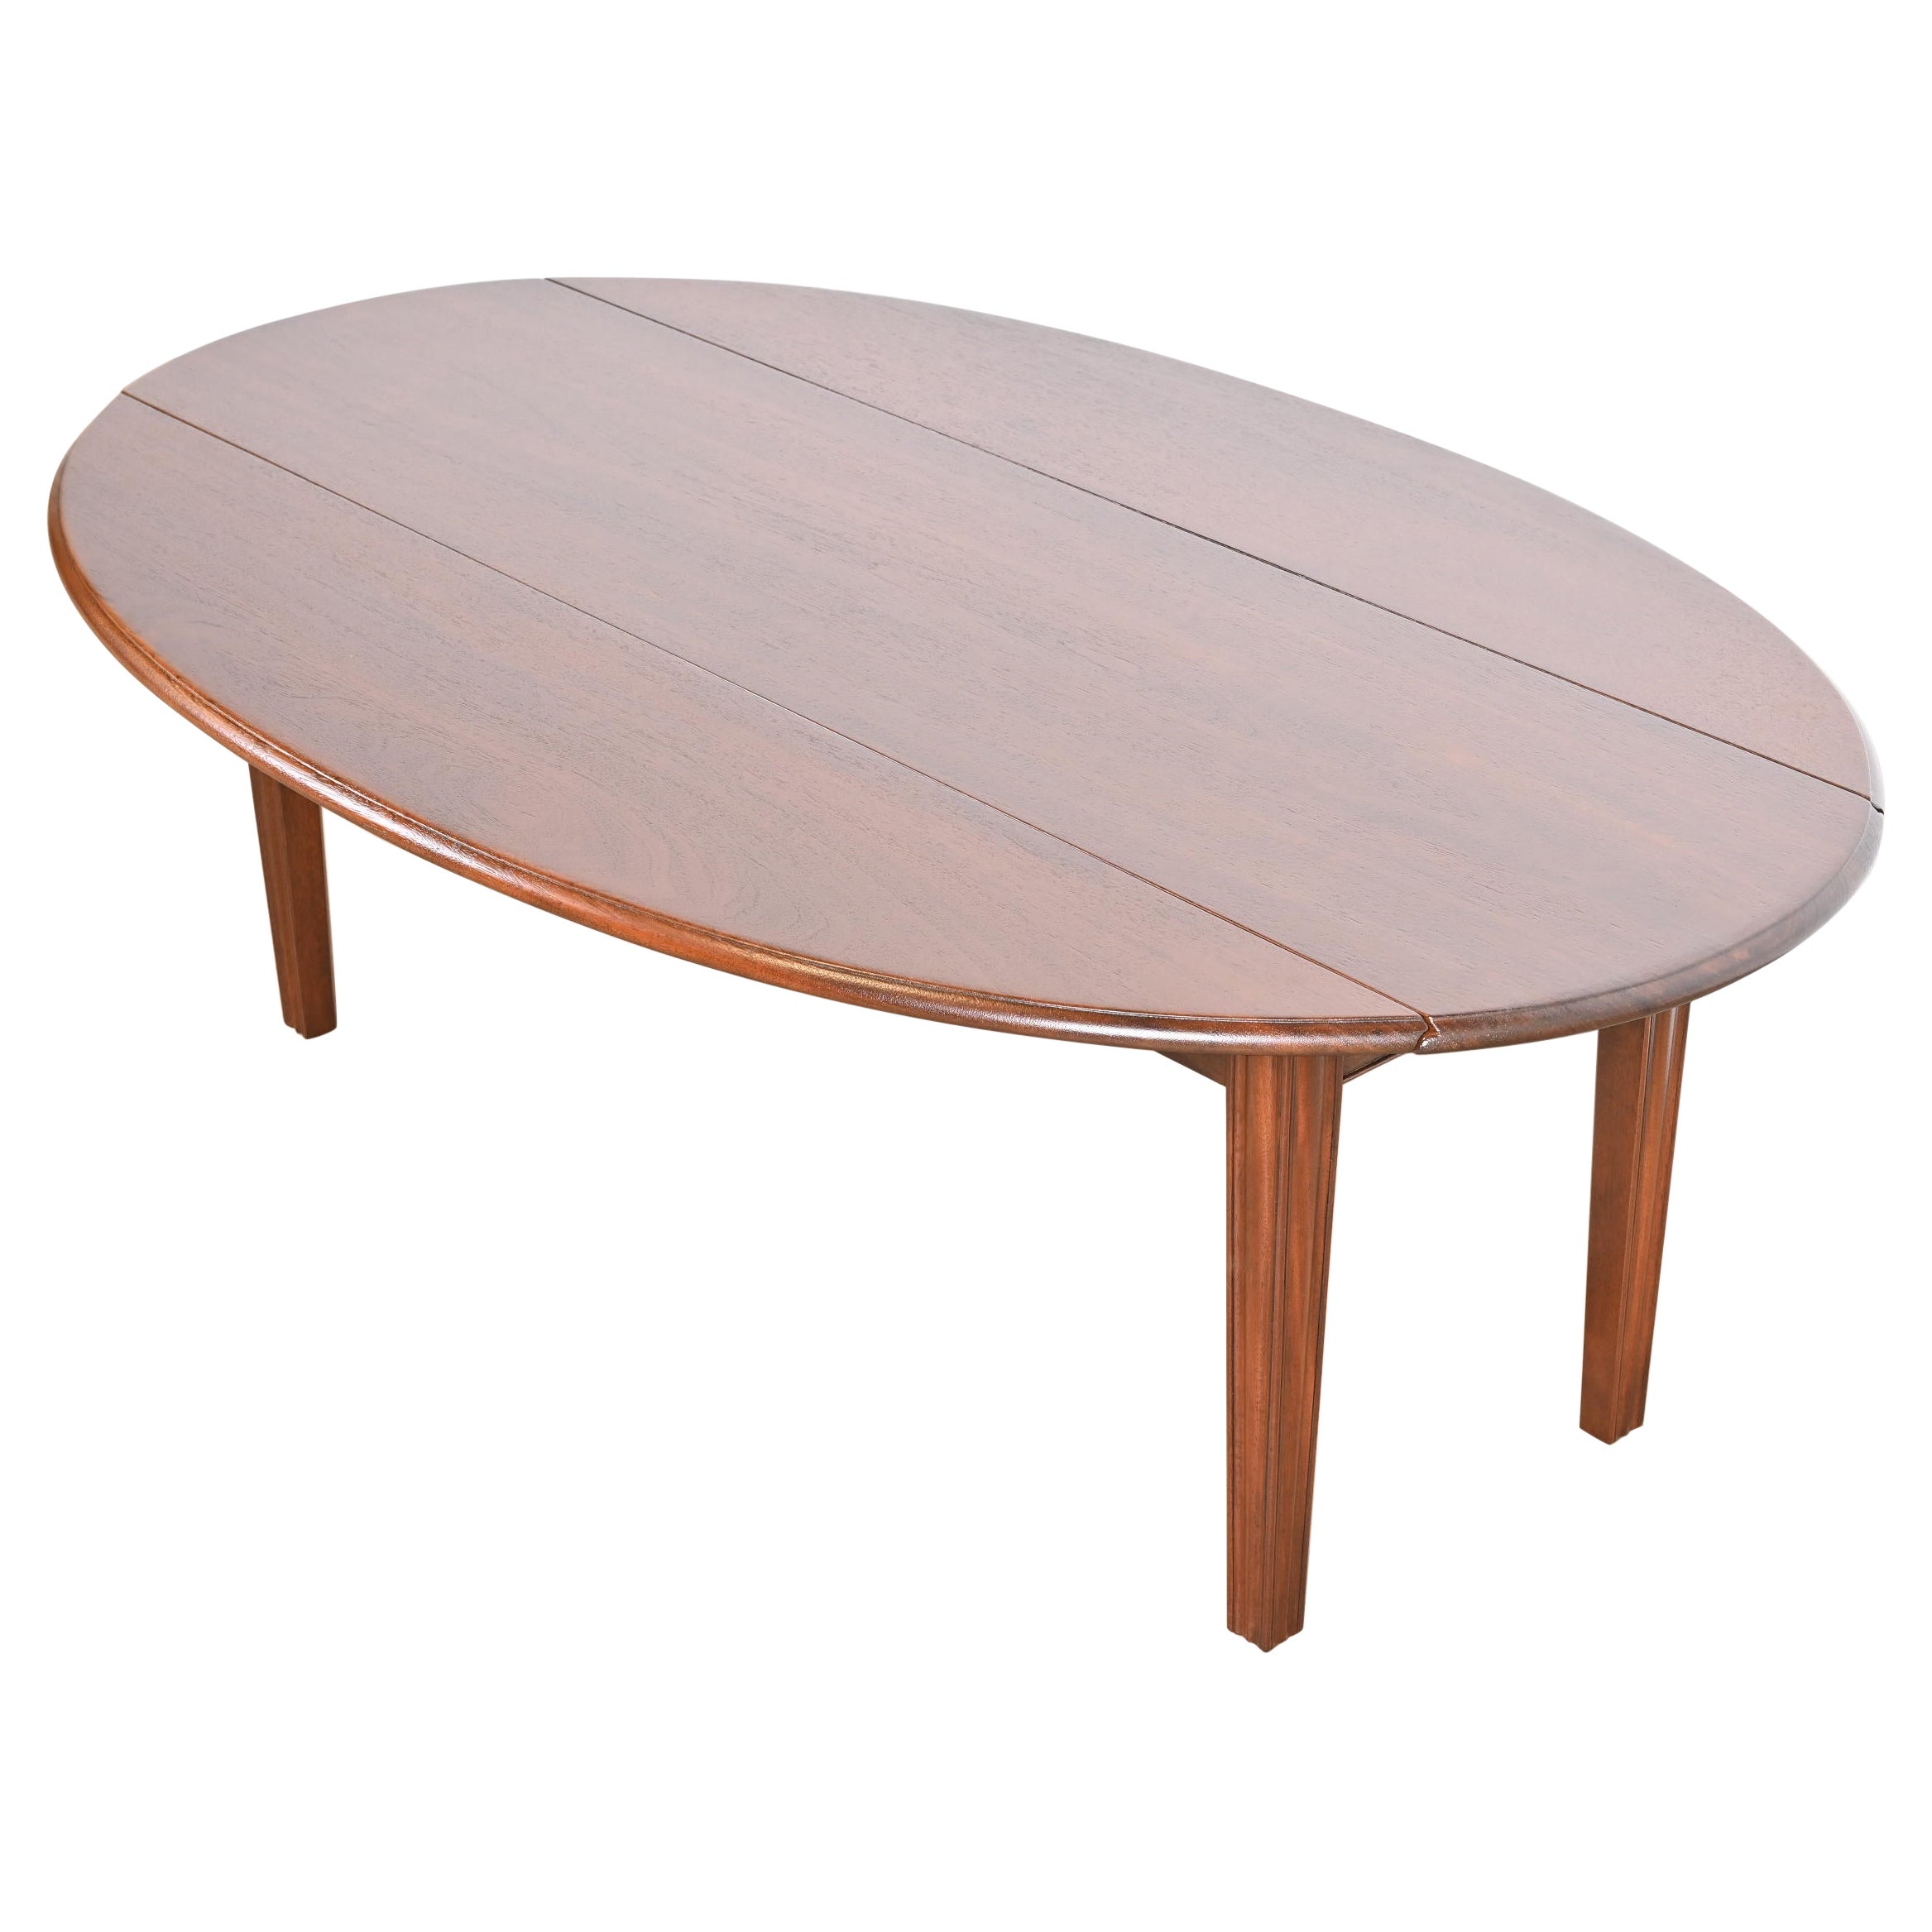 Kittinger American Colonial Mahogany Drop Leaf Coffee Table, Newly Refinished For Sale